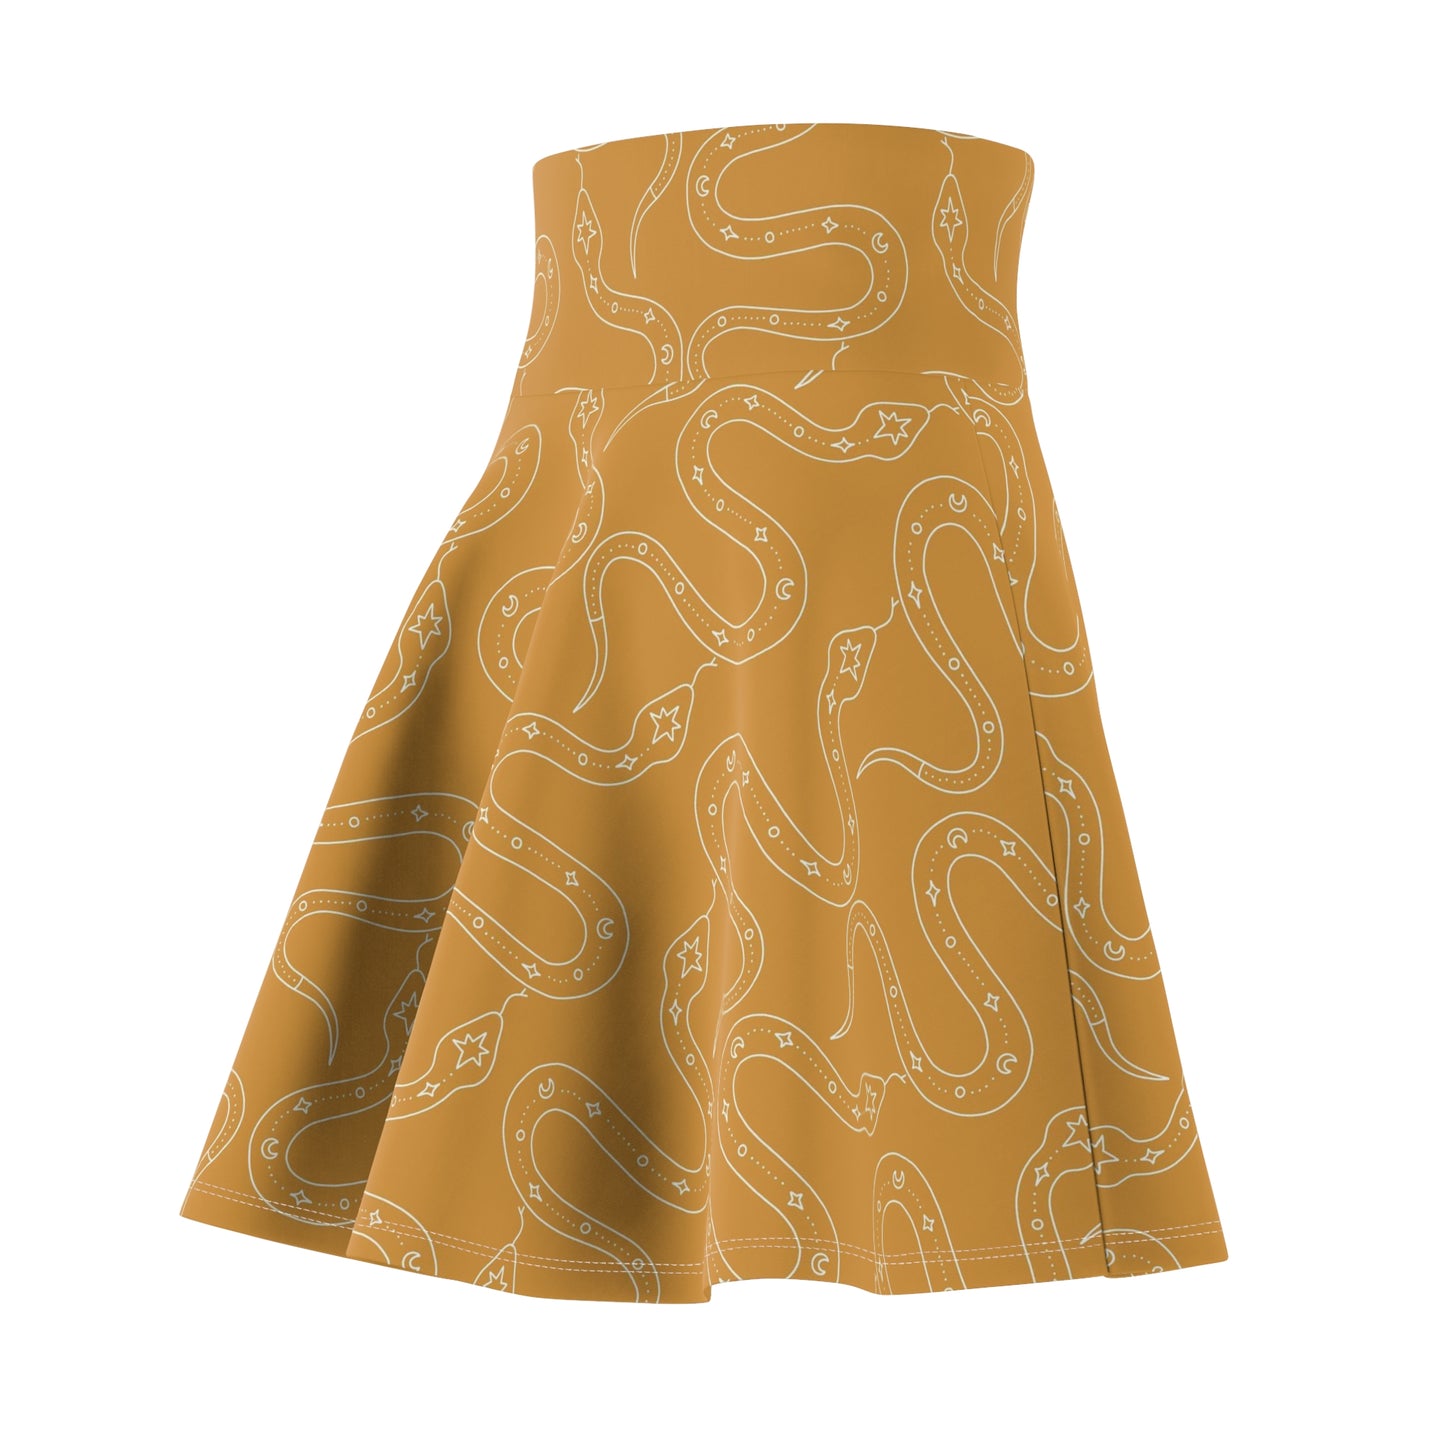 Magical Snakes on Yellow | Witchy Skirt | Magical Skirt | Yellow & Orange